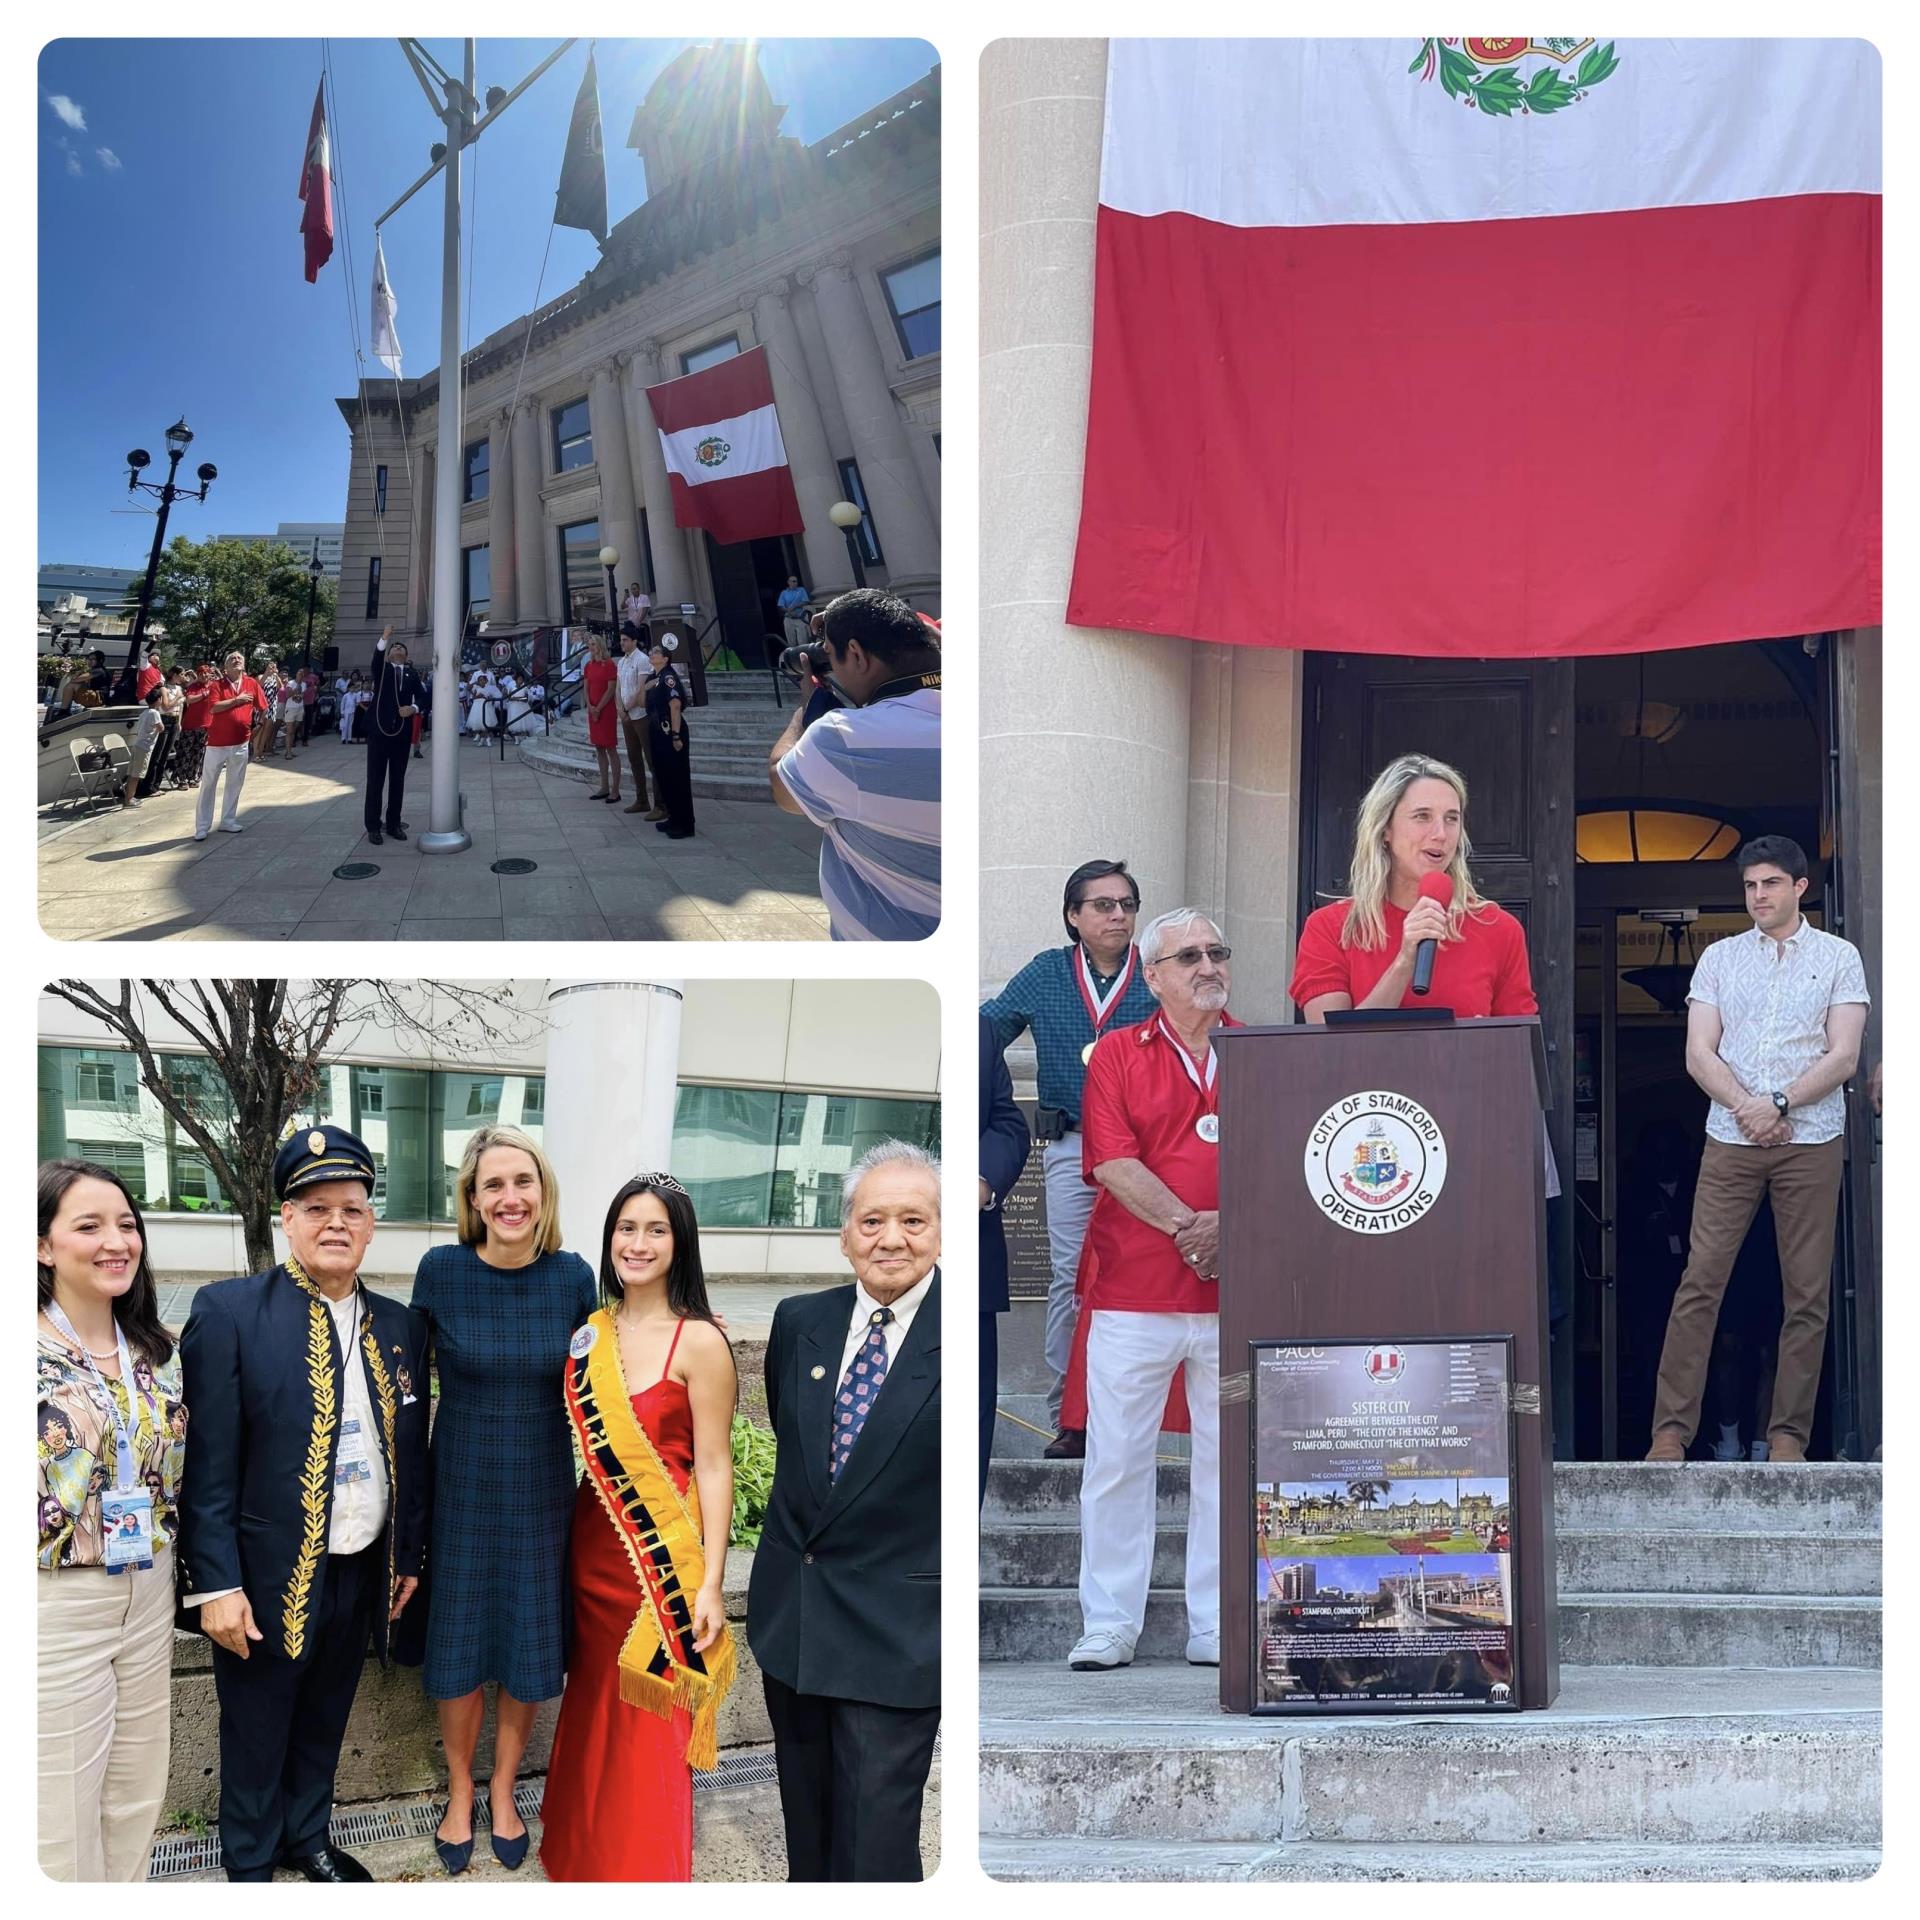 Mayor Simmons participates in the Peruvian and Colombian flag raising ceremonies